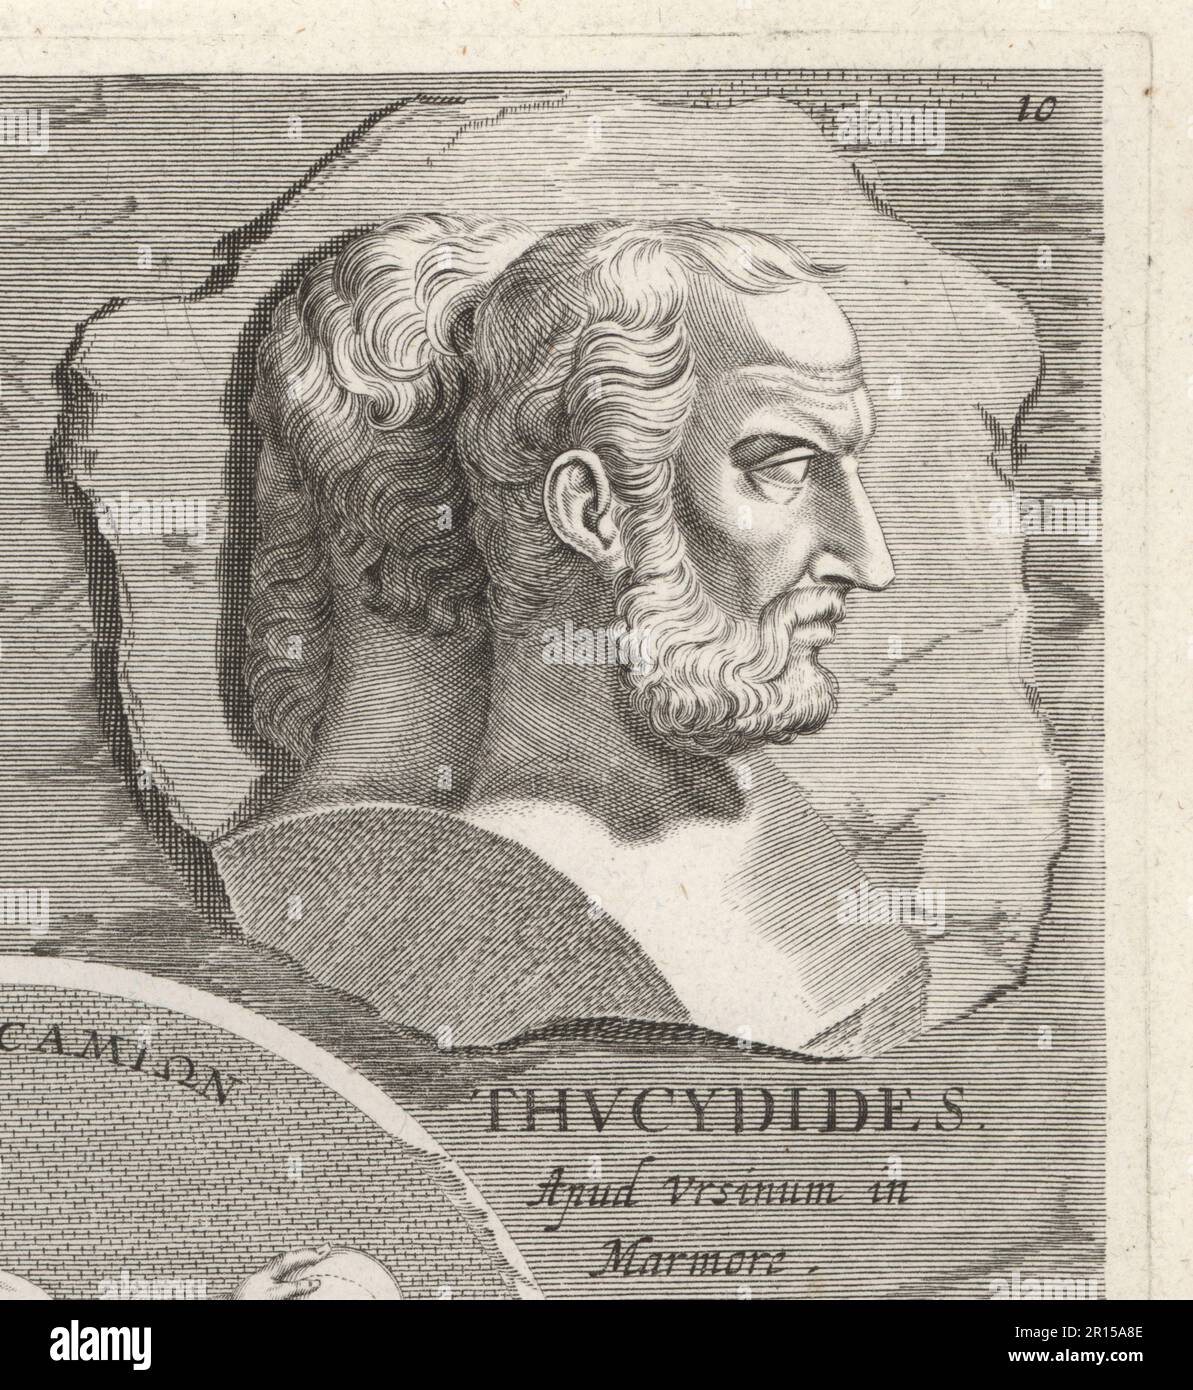 Thucydides, Athenian historian and general, c. 460-400 BC. Author of a History of the Peloponnesian War recounting the fifth-century BC war between Sparta and Athens. Thucydides. Copperplate engraving after an illustration by Joachim von Sandrart from his L’Academia Todesca, della Architectura, Scultura & Pittura, oder Teutsche Academie, der Edlen Bau- Bild- und Mahlerey-Kunste, German Academy of Architecture, Sculpture and Painting, Jacob von Sandrart, Nuremberg, 1675. Stock Photo